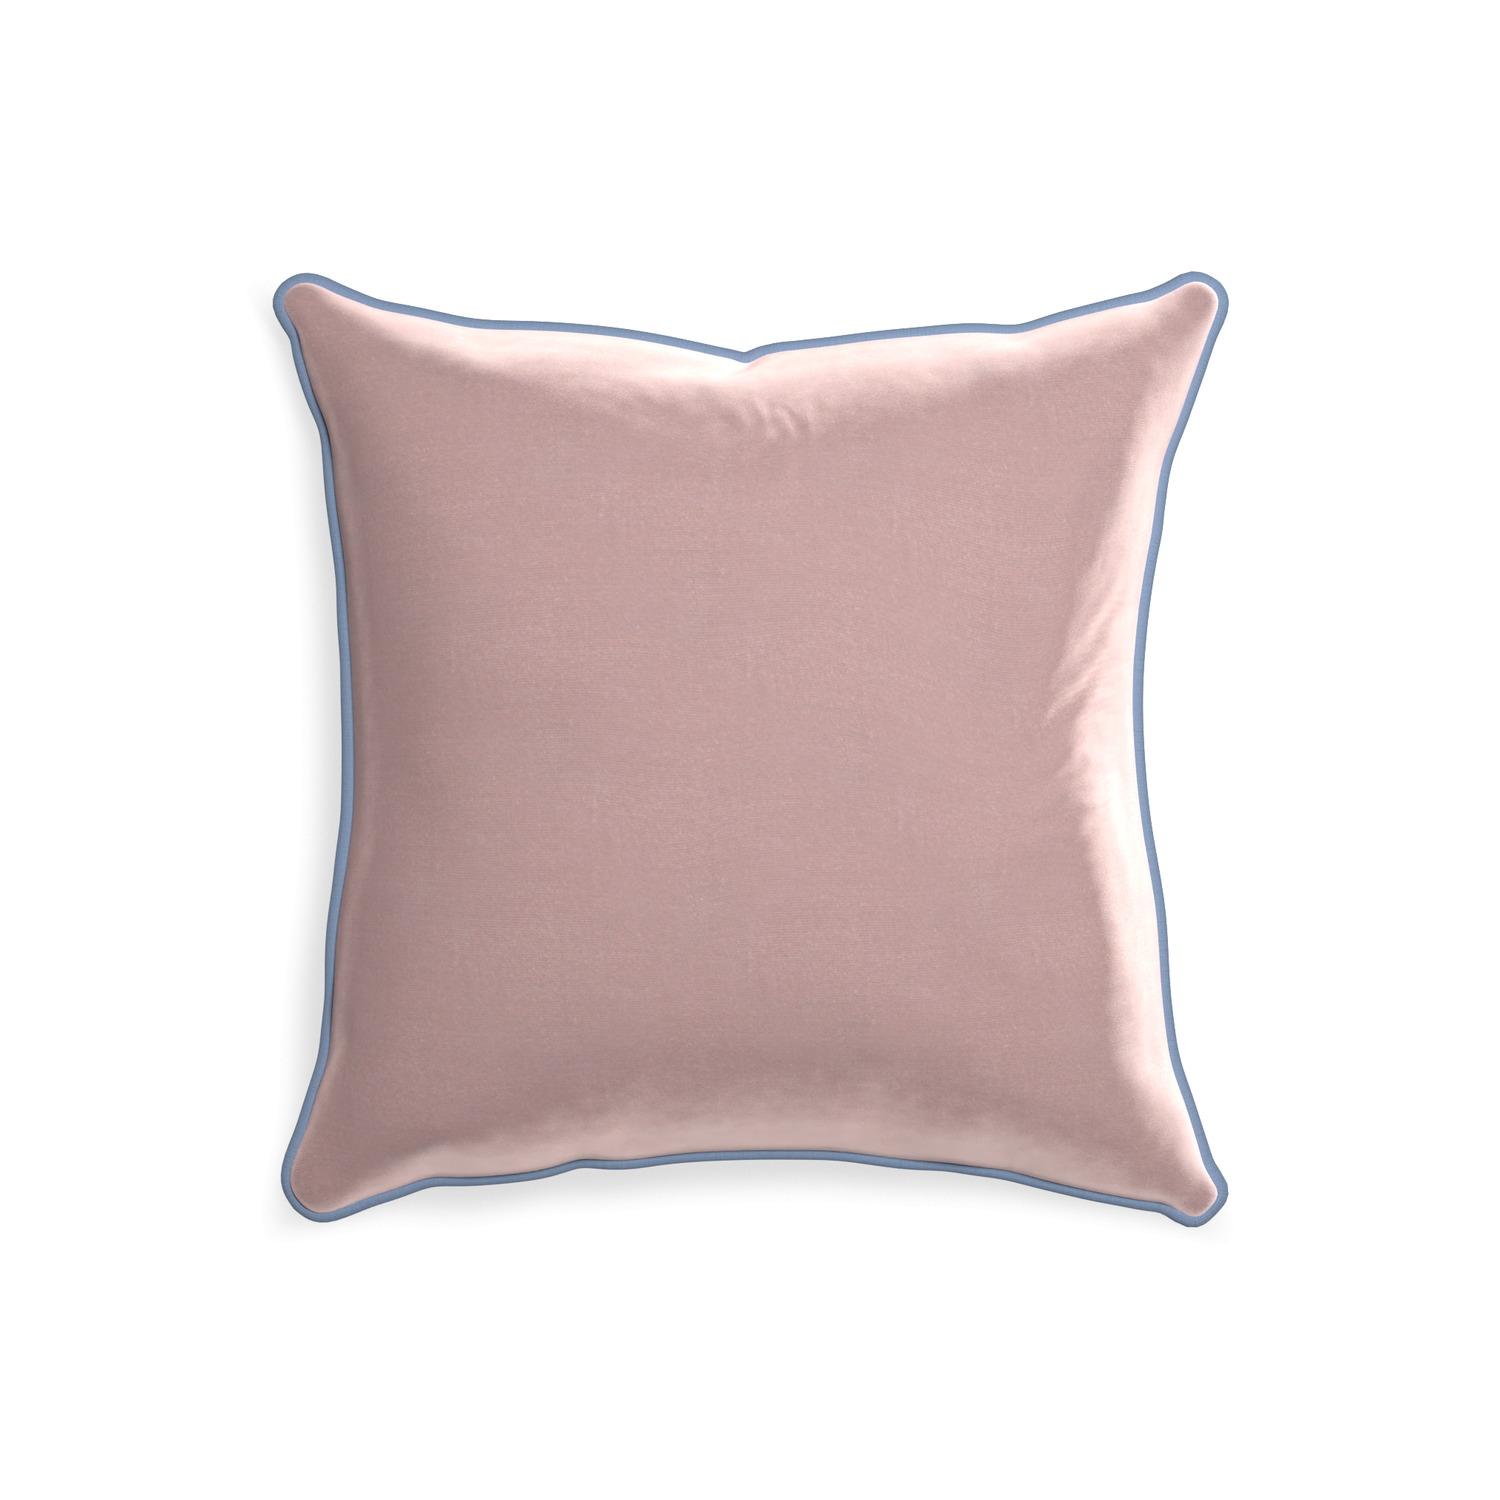 20-square mauve velvet custom pillow with sky piping on white background